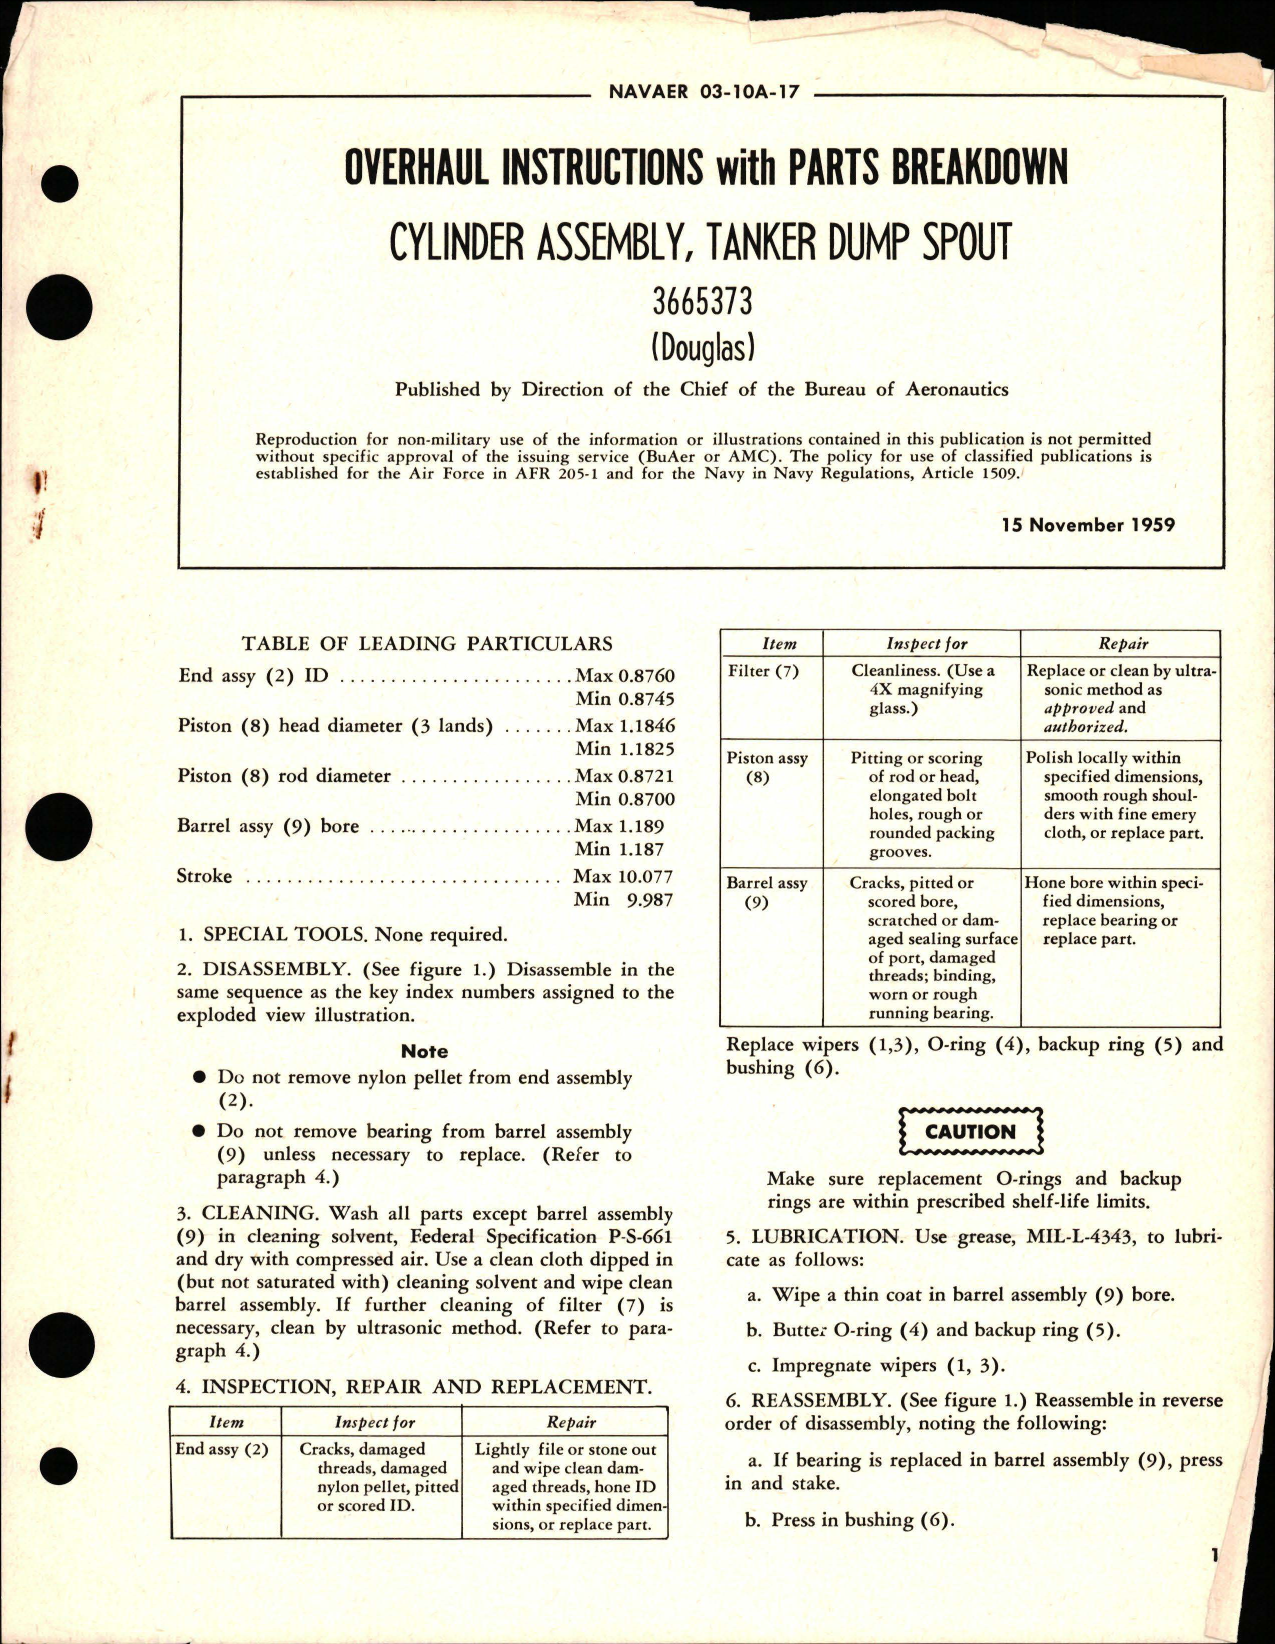 Sample page 1 from AirCorps Library document: Overhaul Instructions with Parts Breakdown for Tanker Dump Spout Cylinder Assembly - 3665373